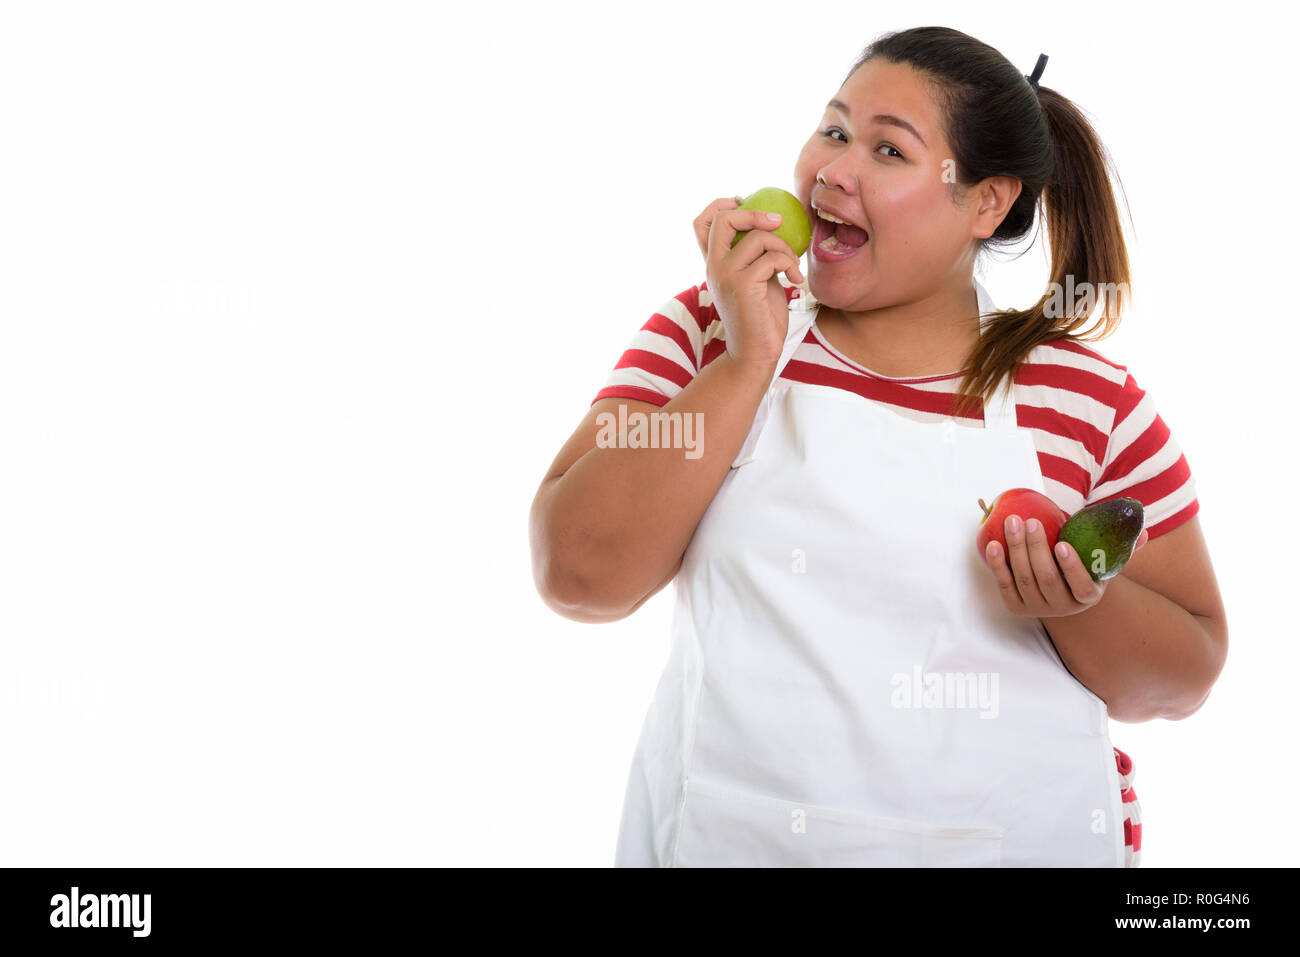 Studio shot of young happy fat Asian woman smiling and eating gr Stock Photo